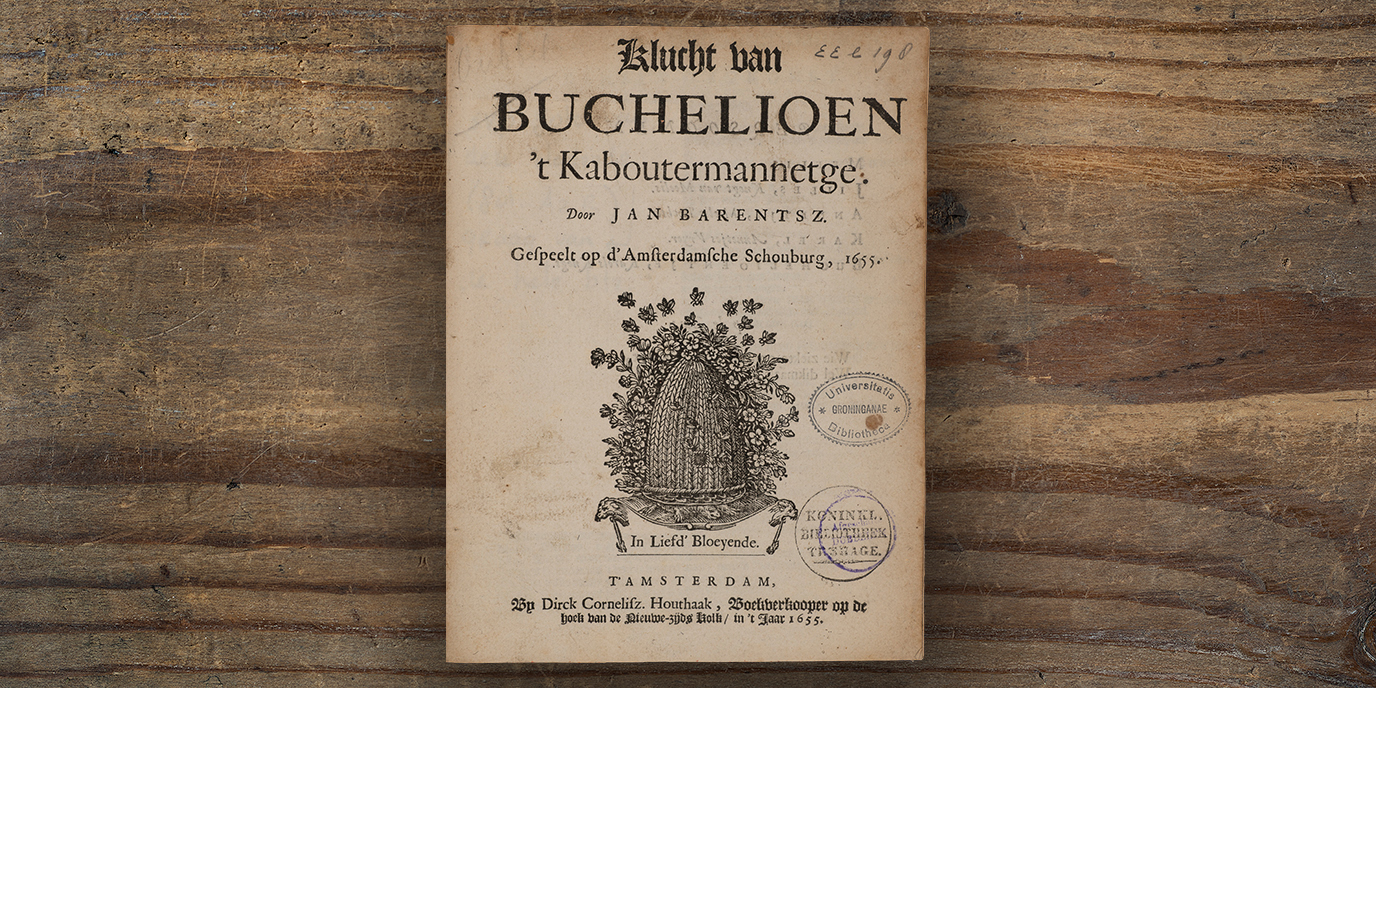 The “Klucht van Buchelioen ’t Kaboutermannetge” was written by Jan Barentsz.[12] Barentsz. was probably a member of the Amsterdamsche Kamer (Amsterdam Chamber), since the title page shows the arms of the Eerste Nederduytsche Academie (First Dutch Academy) and the motto of De Eglentier (The Sweet Briar), the two chambers from which the Amsterdamsche Kamer arose.[13]